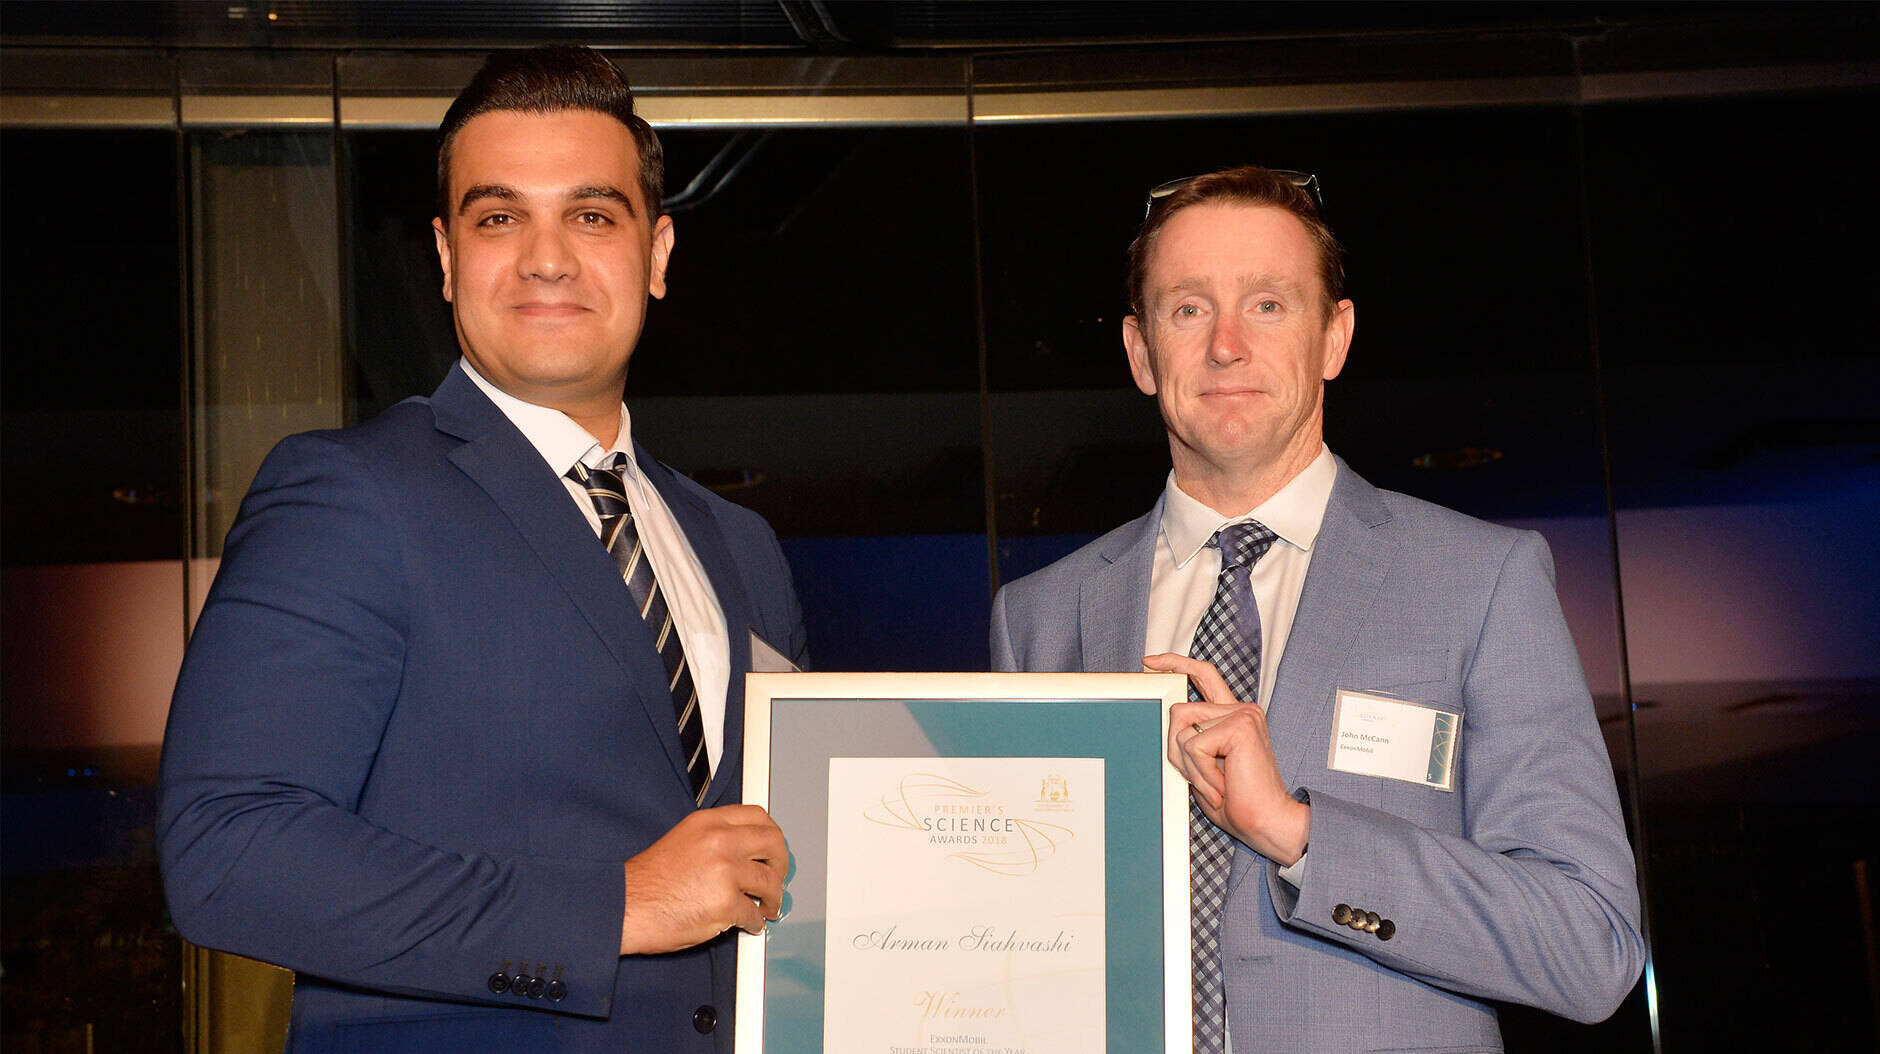 Image Photo — ExxonMobil's Joint Interest Manager, John McCann, presents the Student Scientist of the Year 2018 award to joint winner Arman Siahvashi.